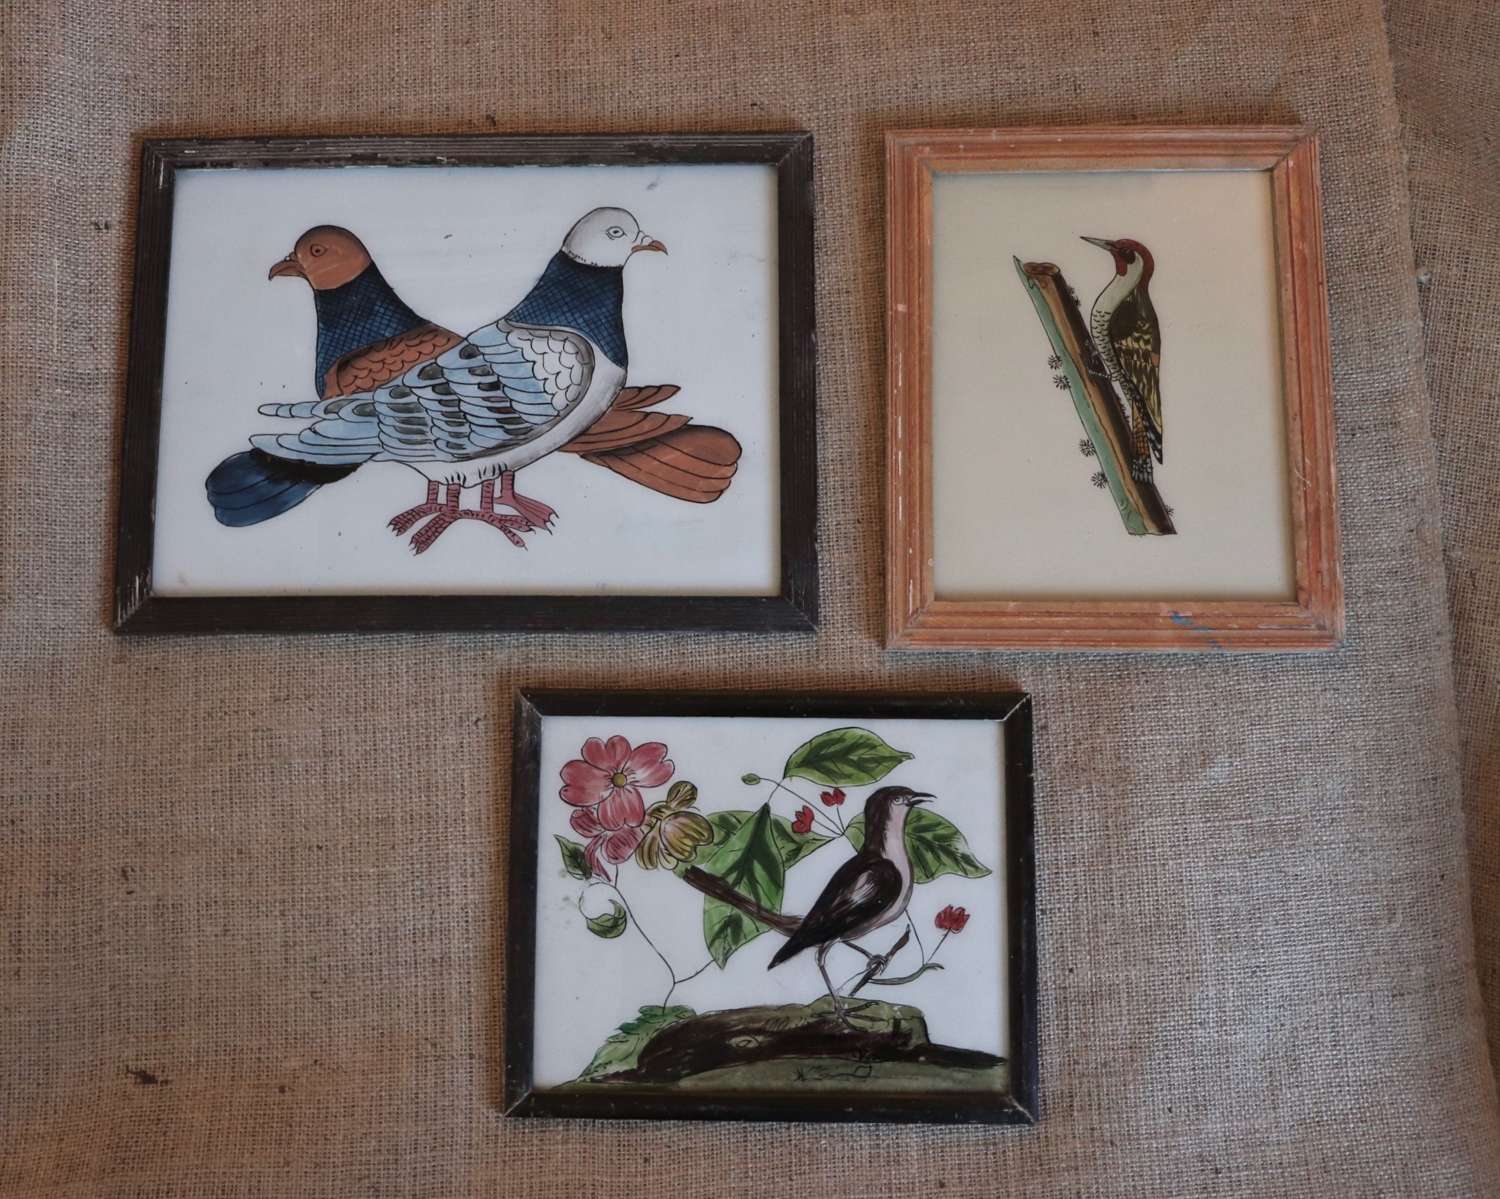 Indian reverse glass paintings in old frames